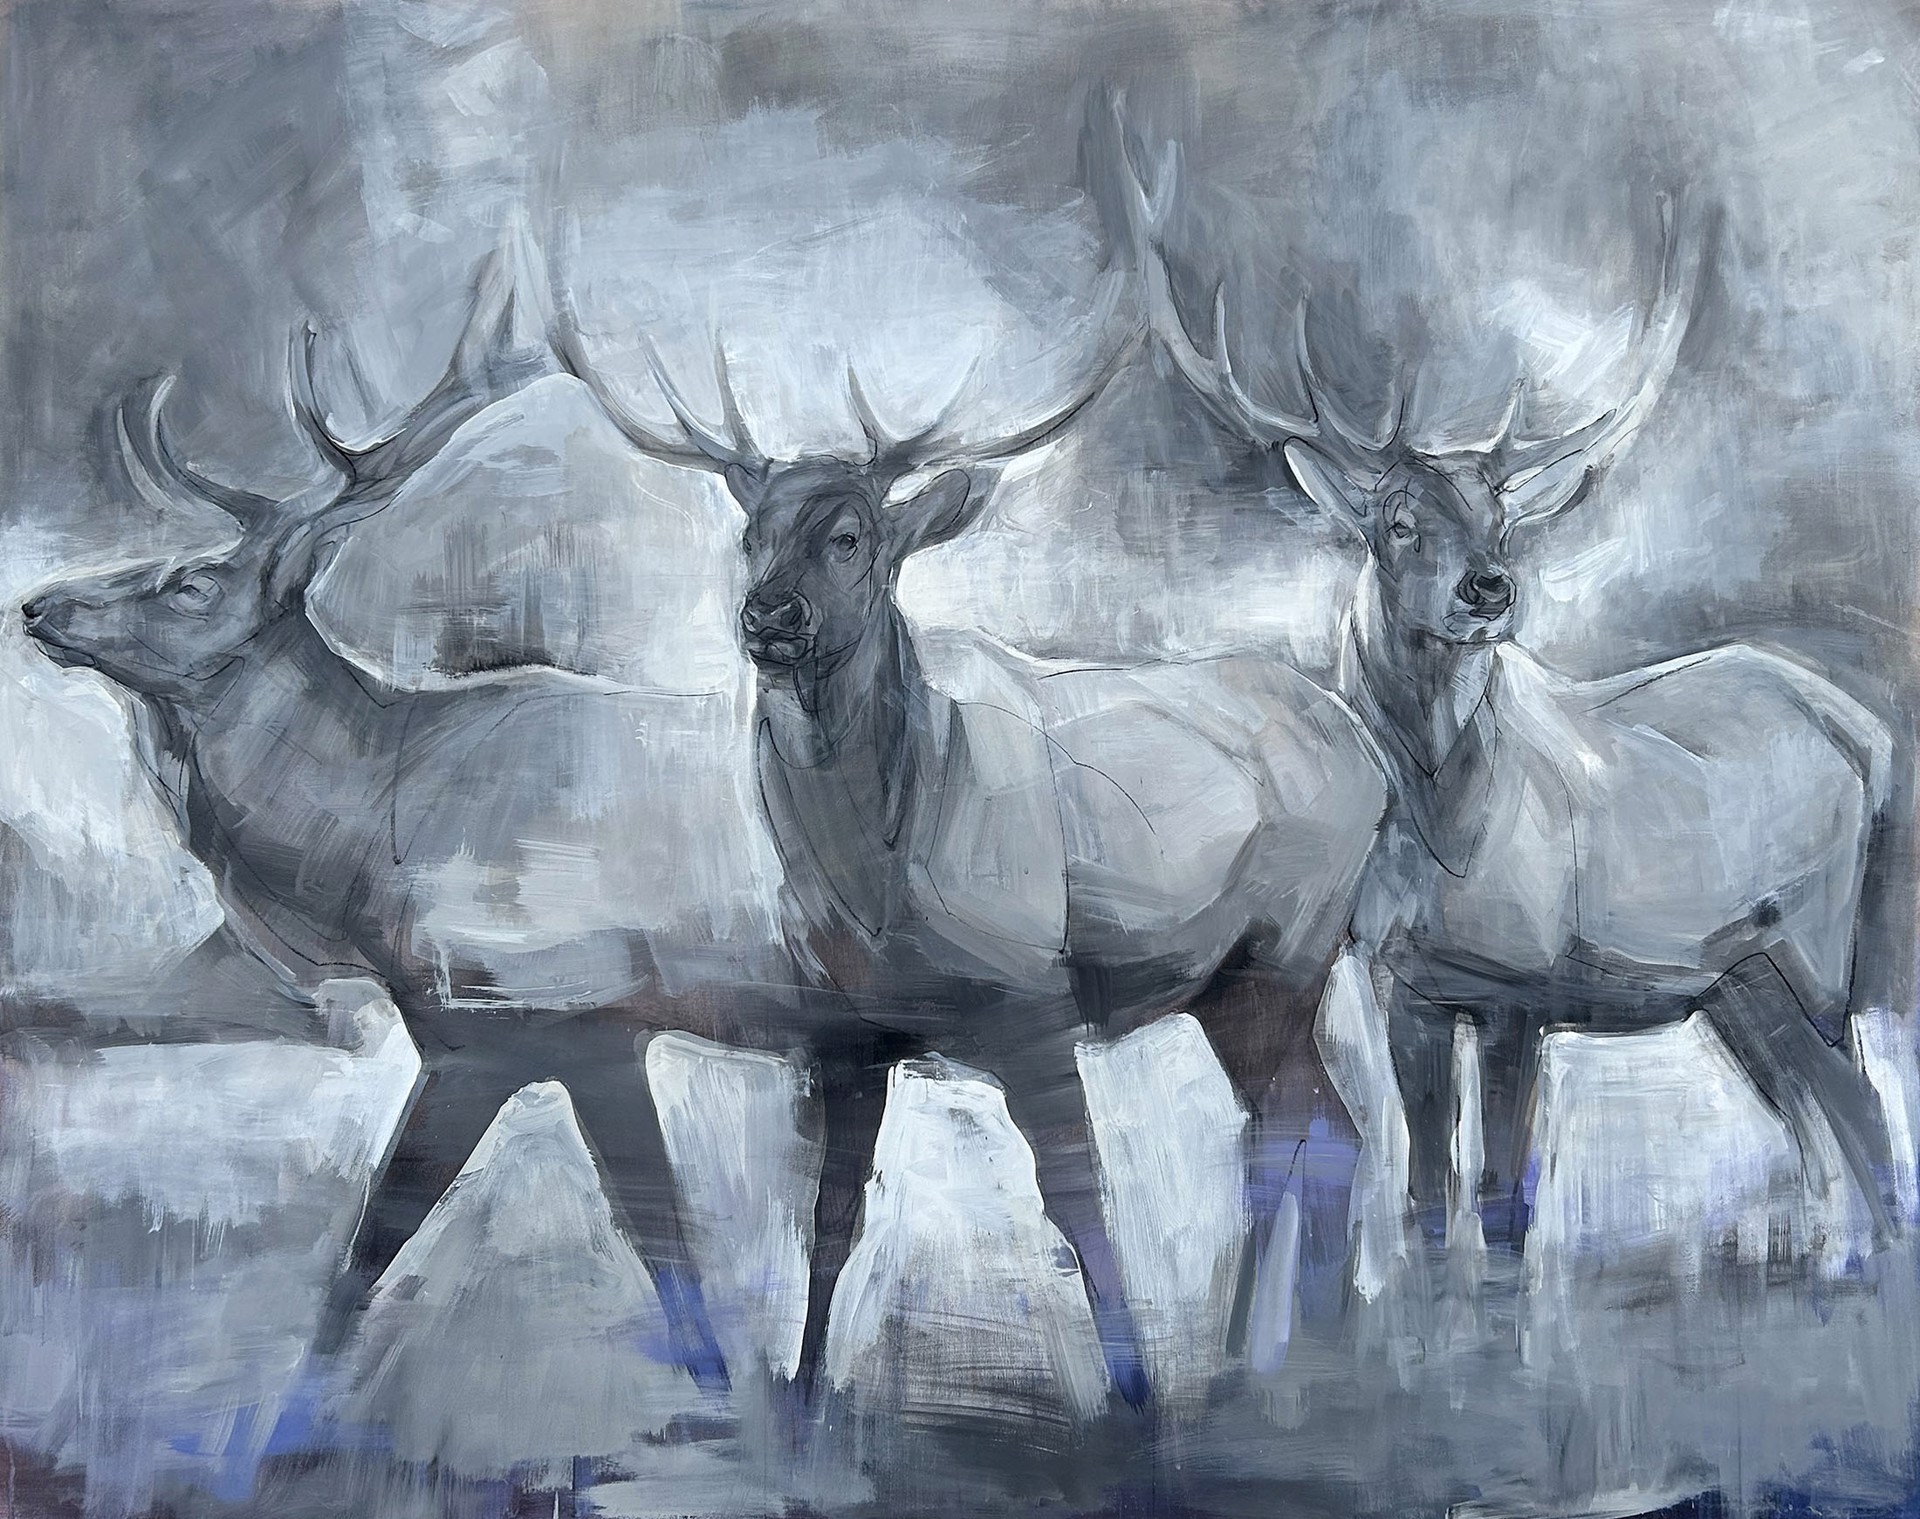 Original Mixed Media Painting By Taryn Boals Featuring Three Elk In Black And White With Hints Of Bright Blue